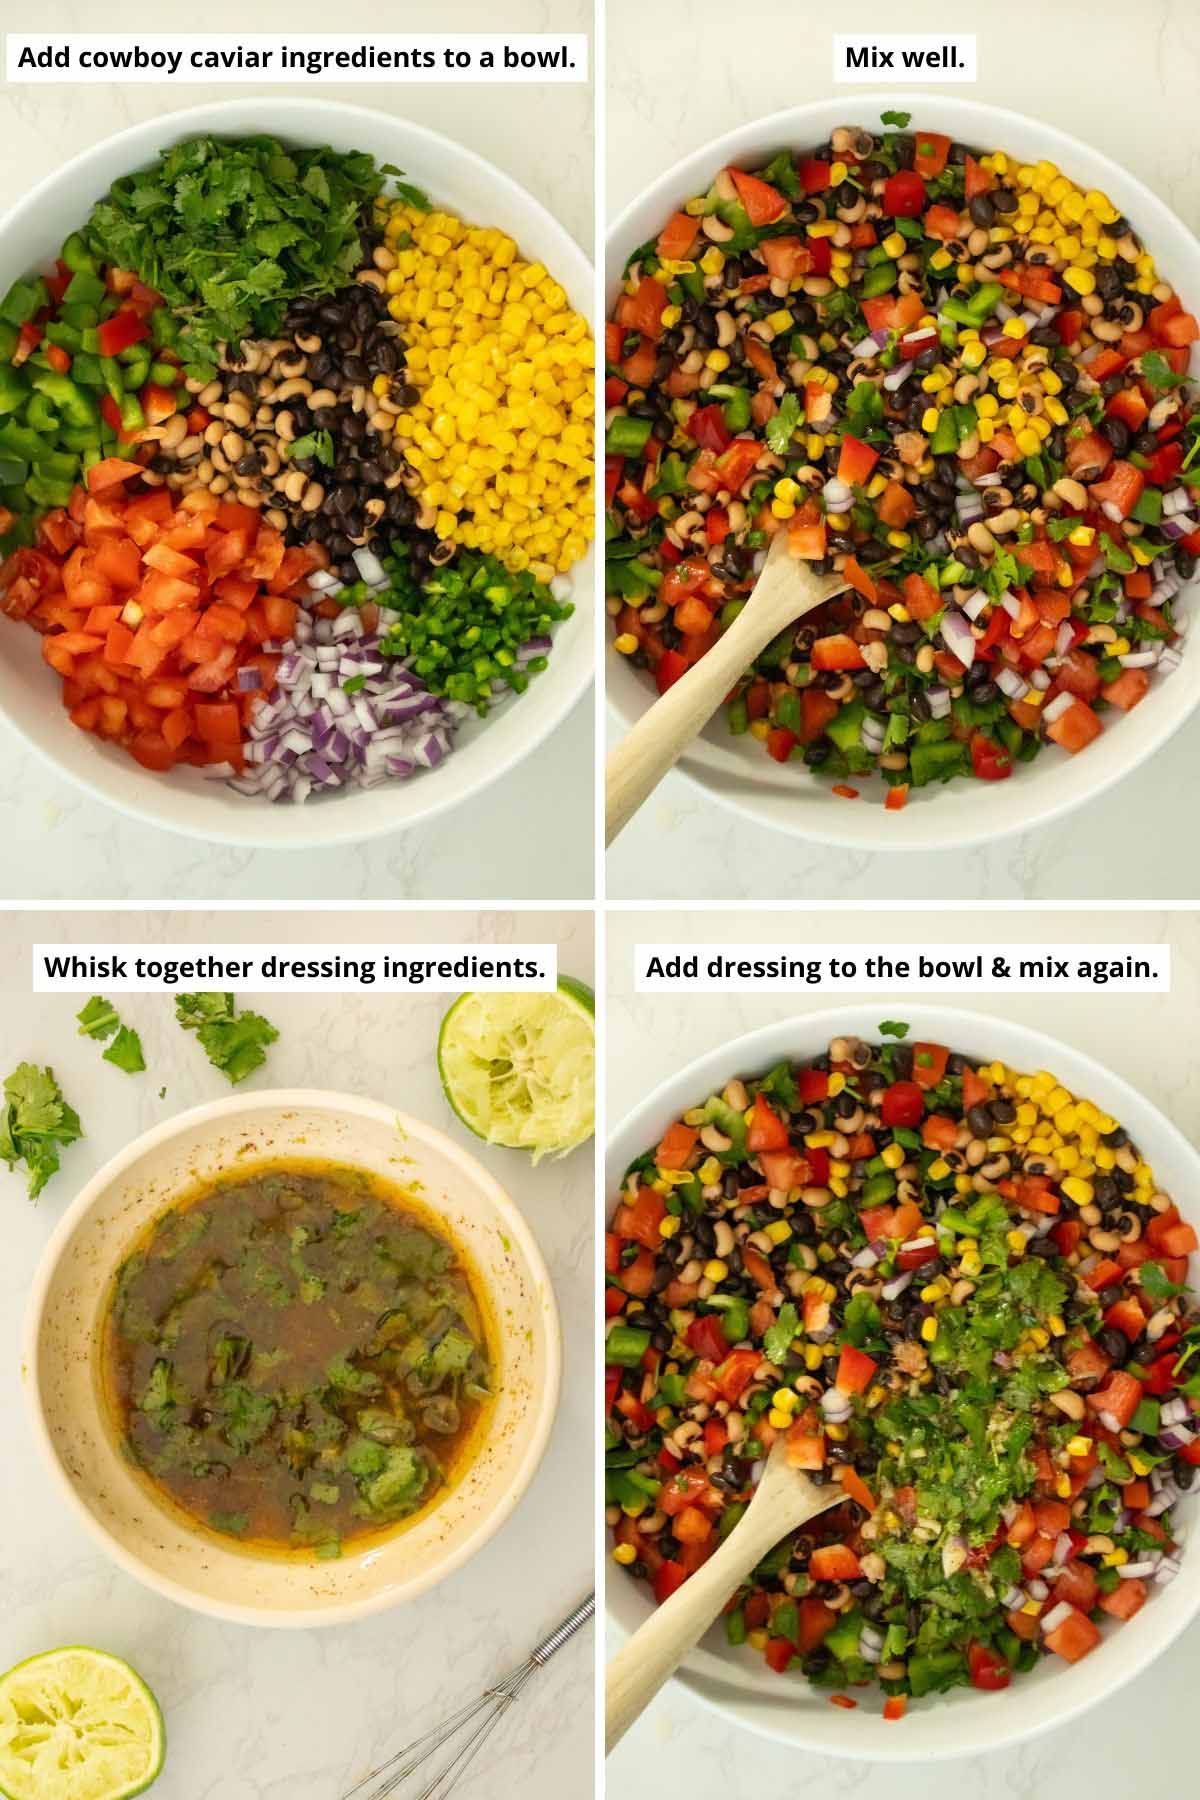 image collage showing the Texas caviar ingredients in the bowl before and after mixing and the dressing mixed in a bowl and added to the cowboy caviar